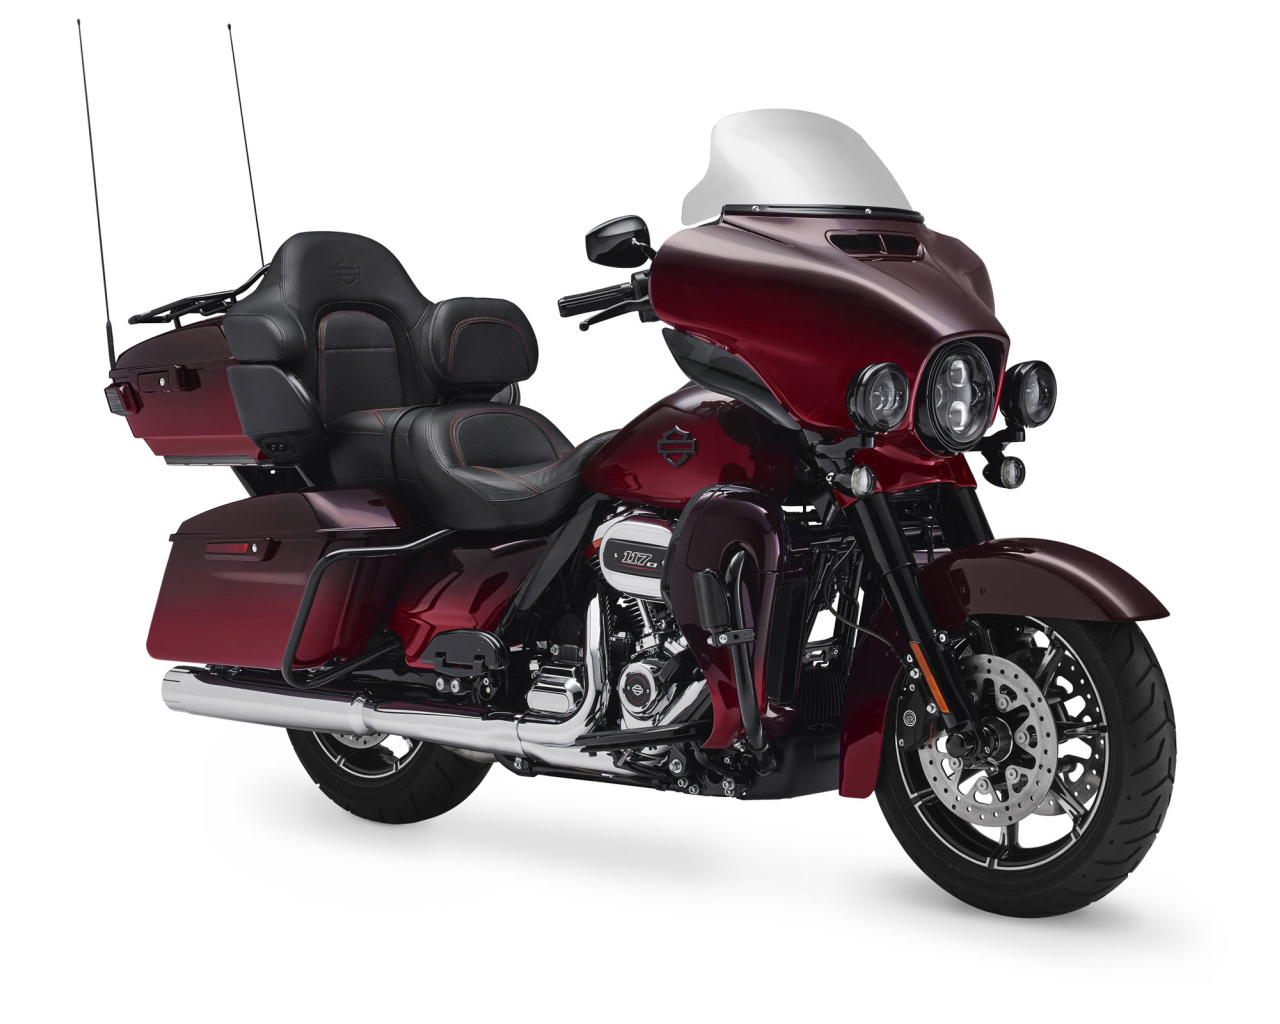 Red Harley-Davidson motorcycle CVO Limited 2018 on white background